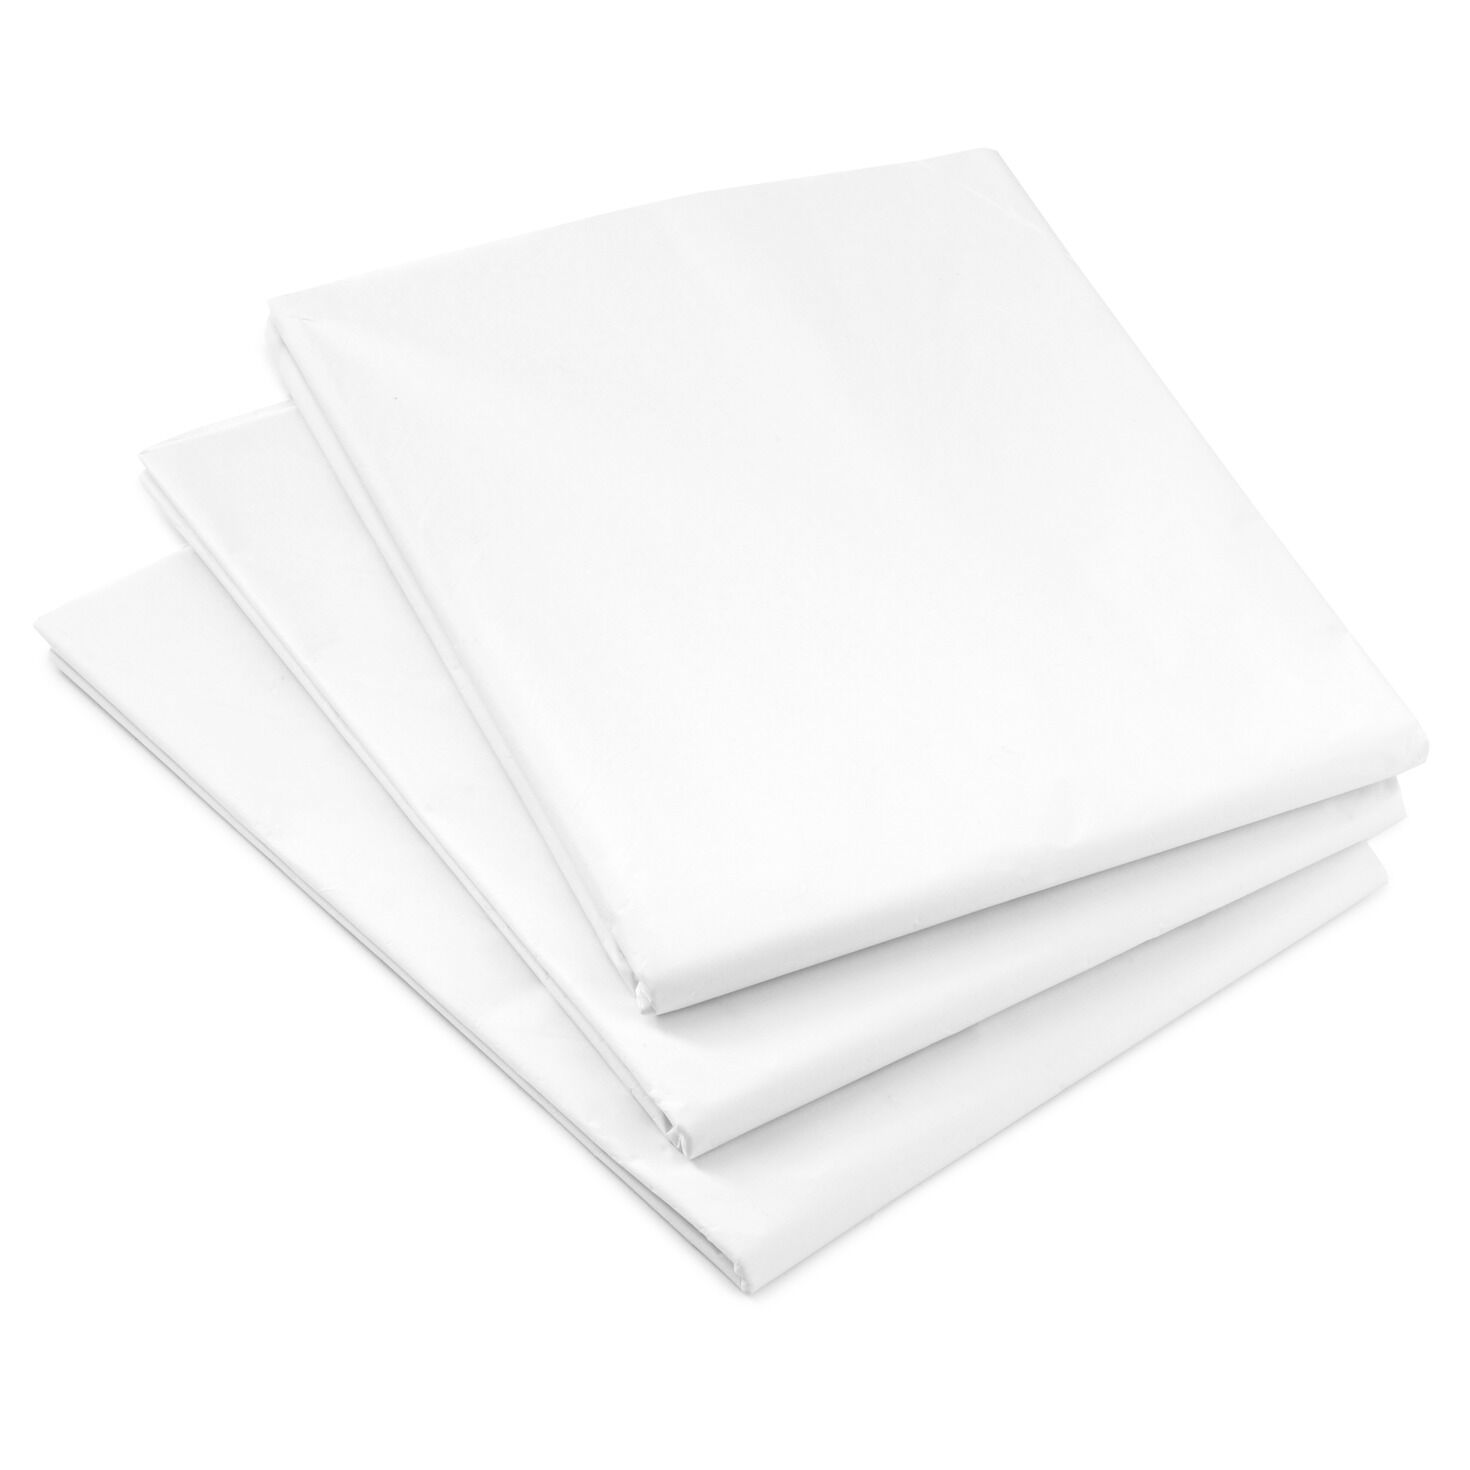 480 Sheets White Tissue Paper Free Shipping!!! 